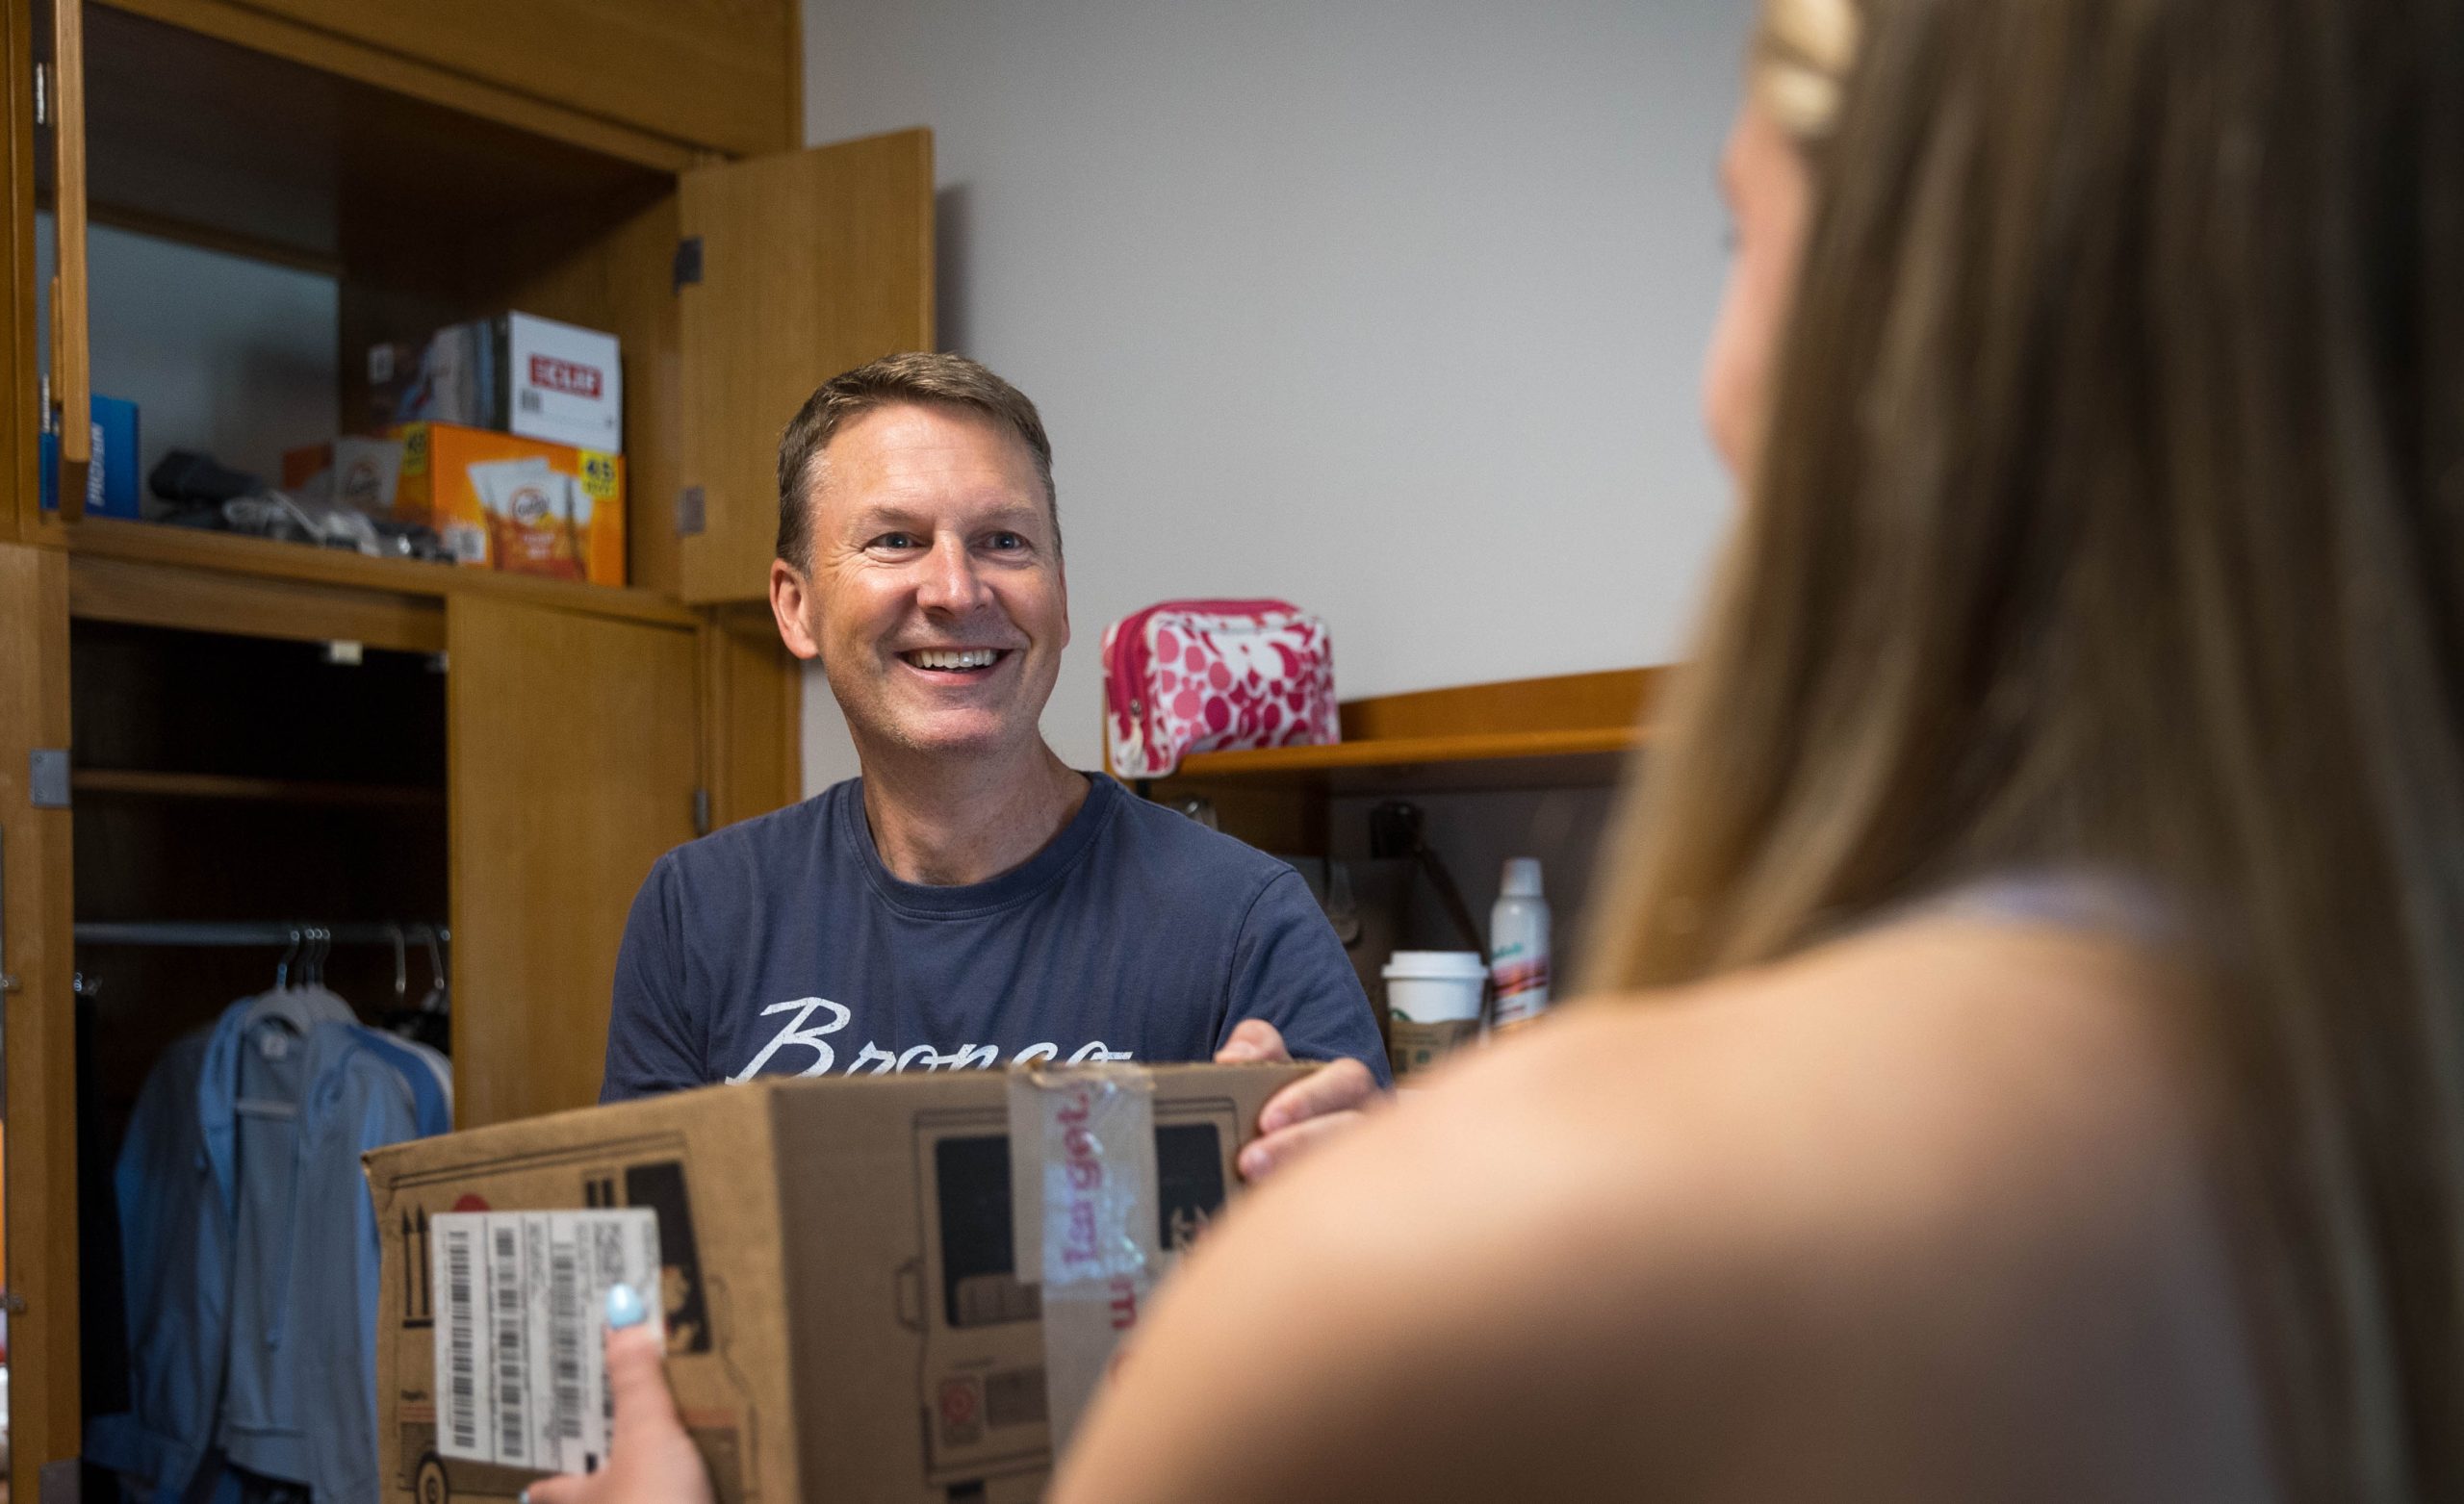 A dad looks on at his daughter, whose back is to the camera, and smiles to her as he holds a box on move-in day in her dorm. 